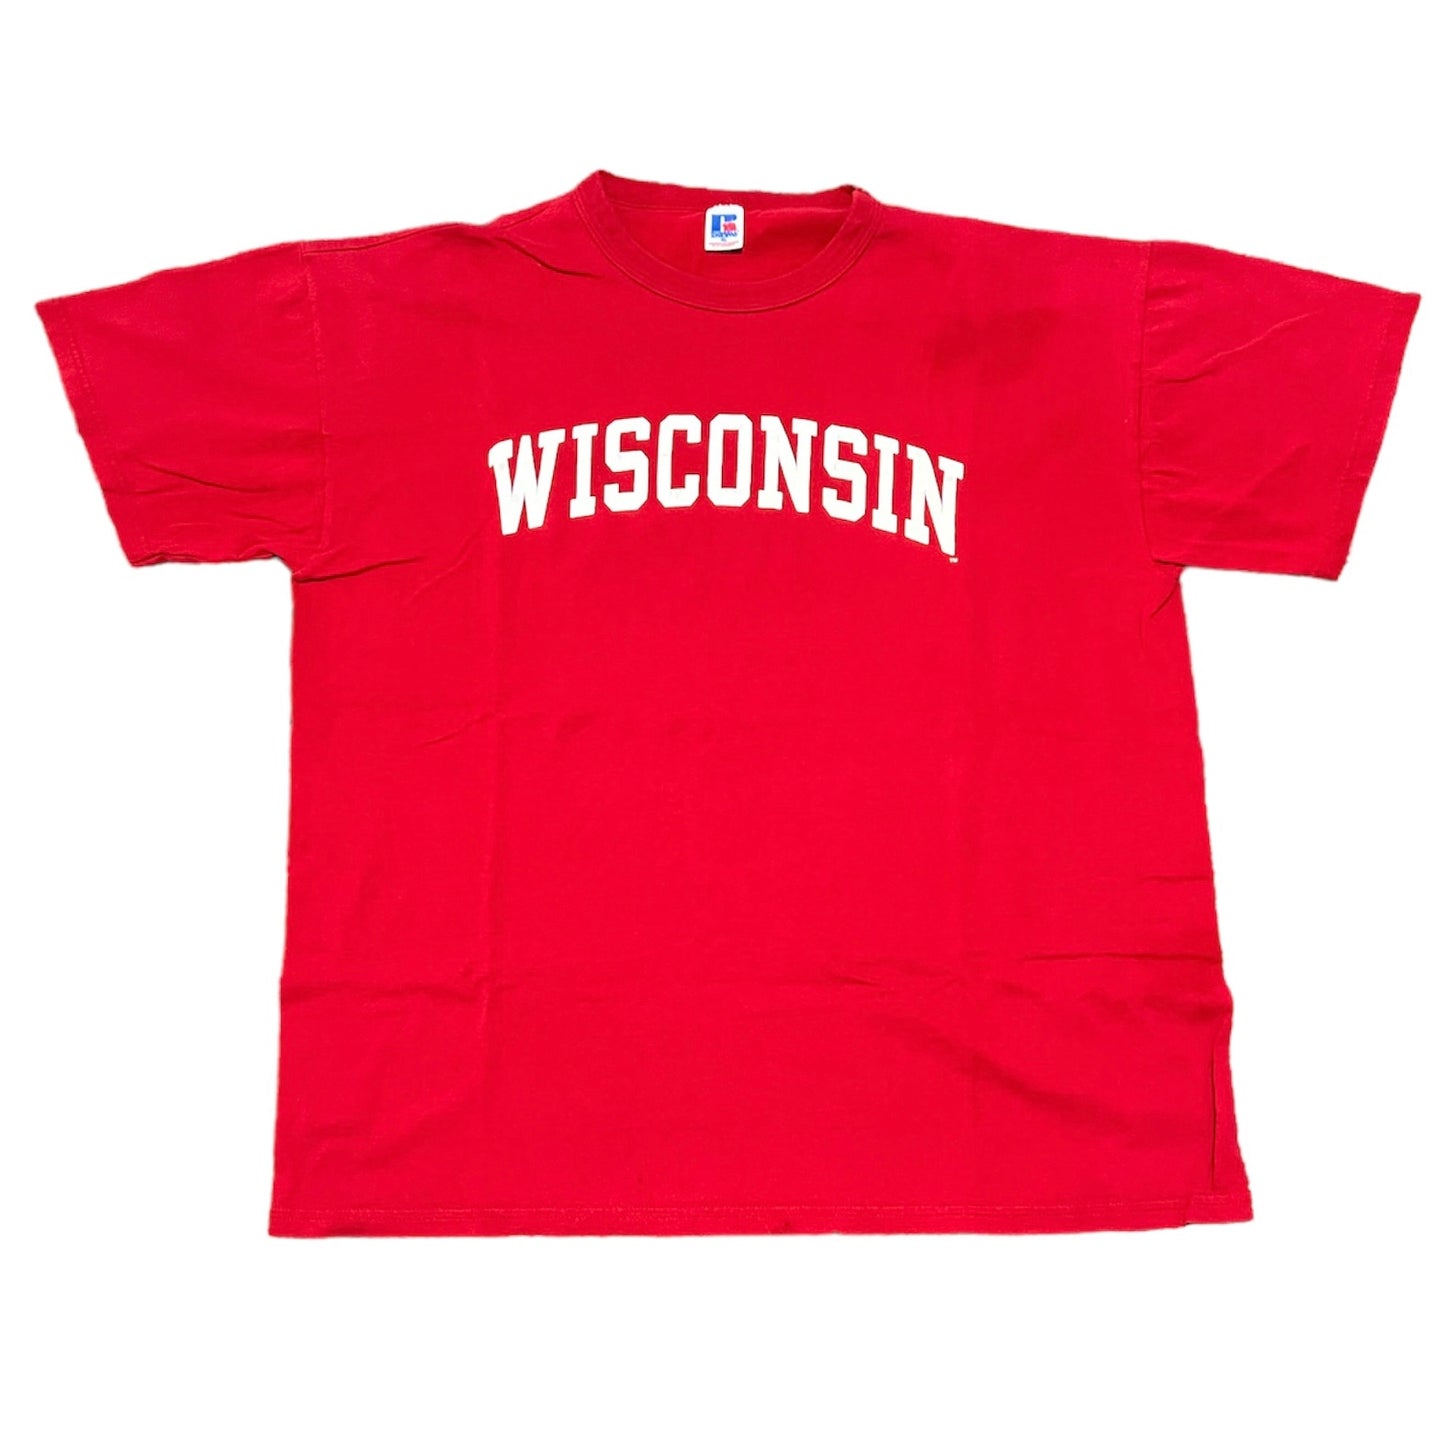 Russell Wisconsin T-Shirt Size X-Large